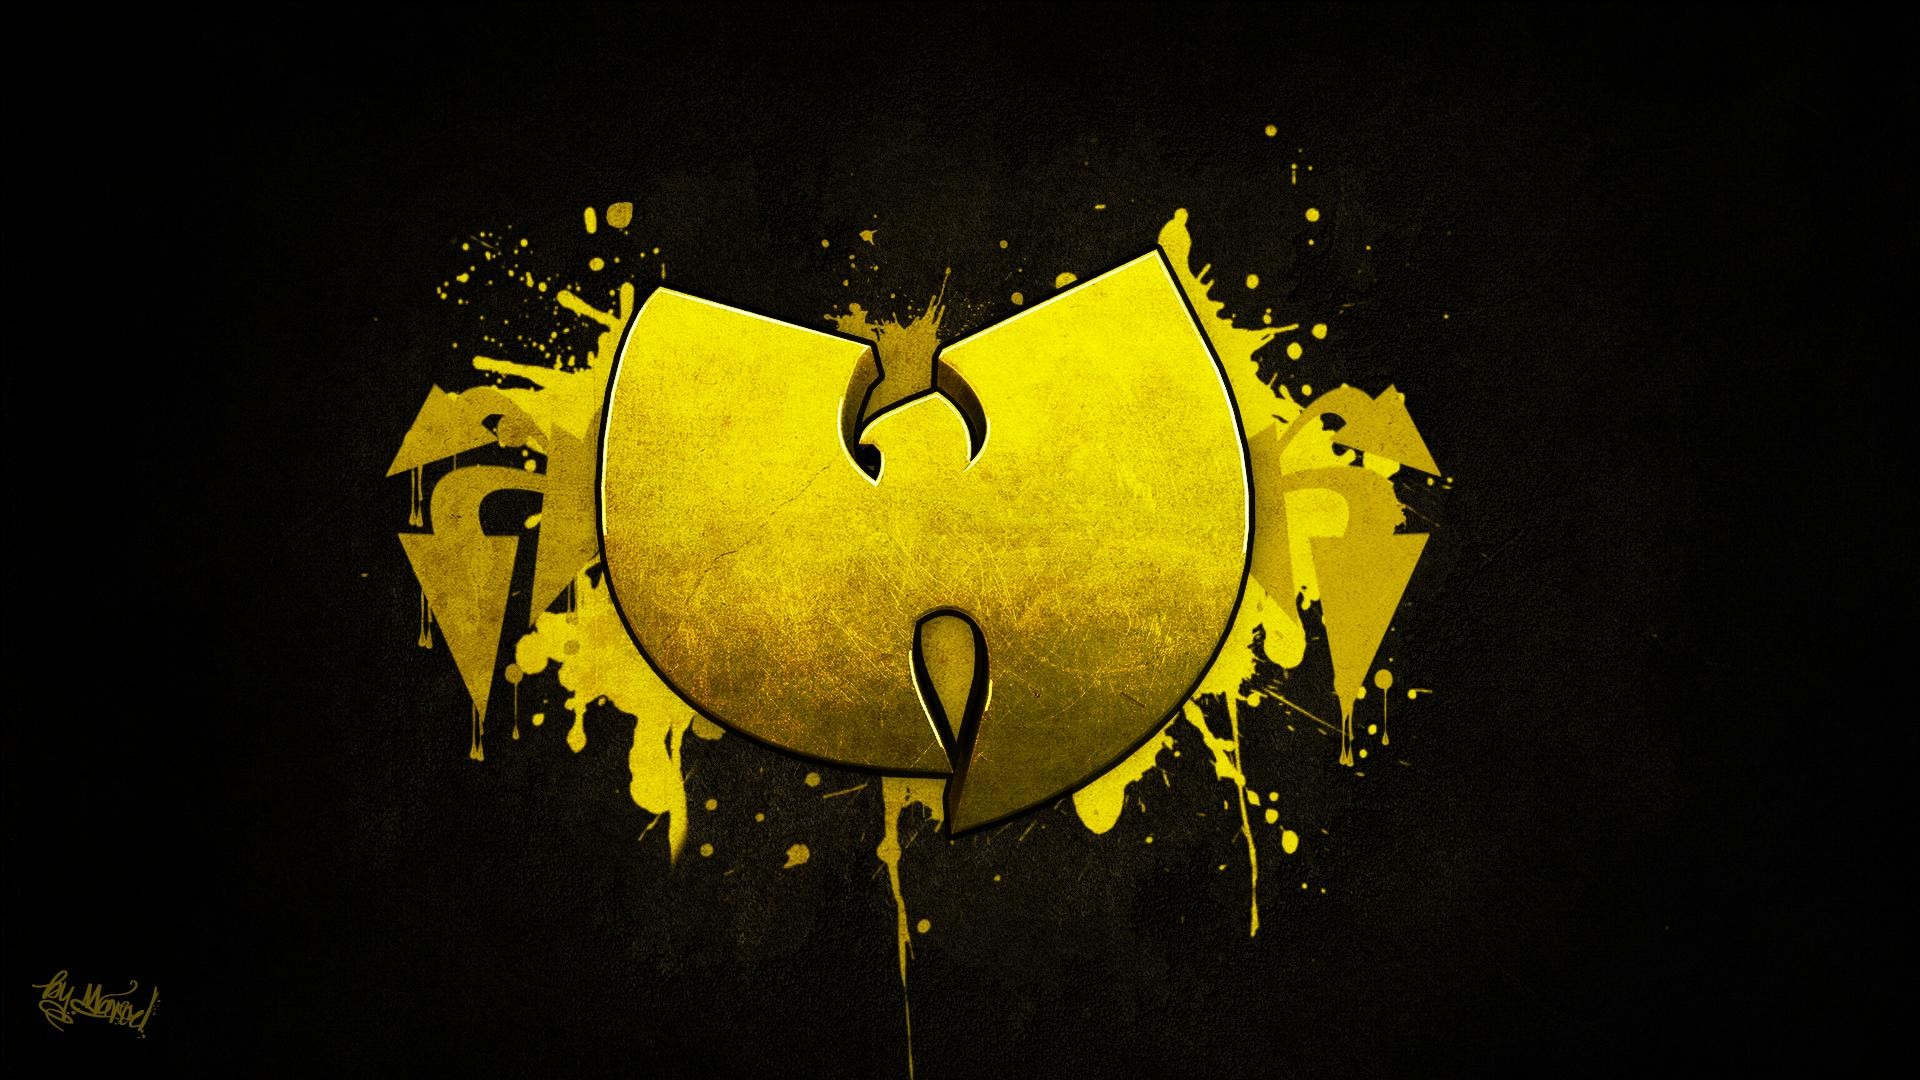 Undefined Wu Tang Background 27 Wallpapers Adorable Wallpapers Desktop Pinterest Wu tang and Wallpaper